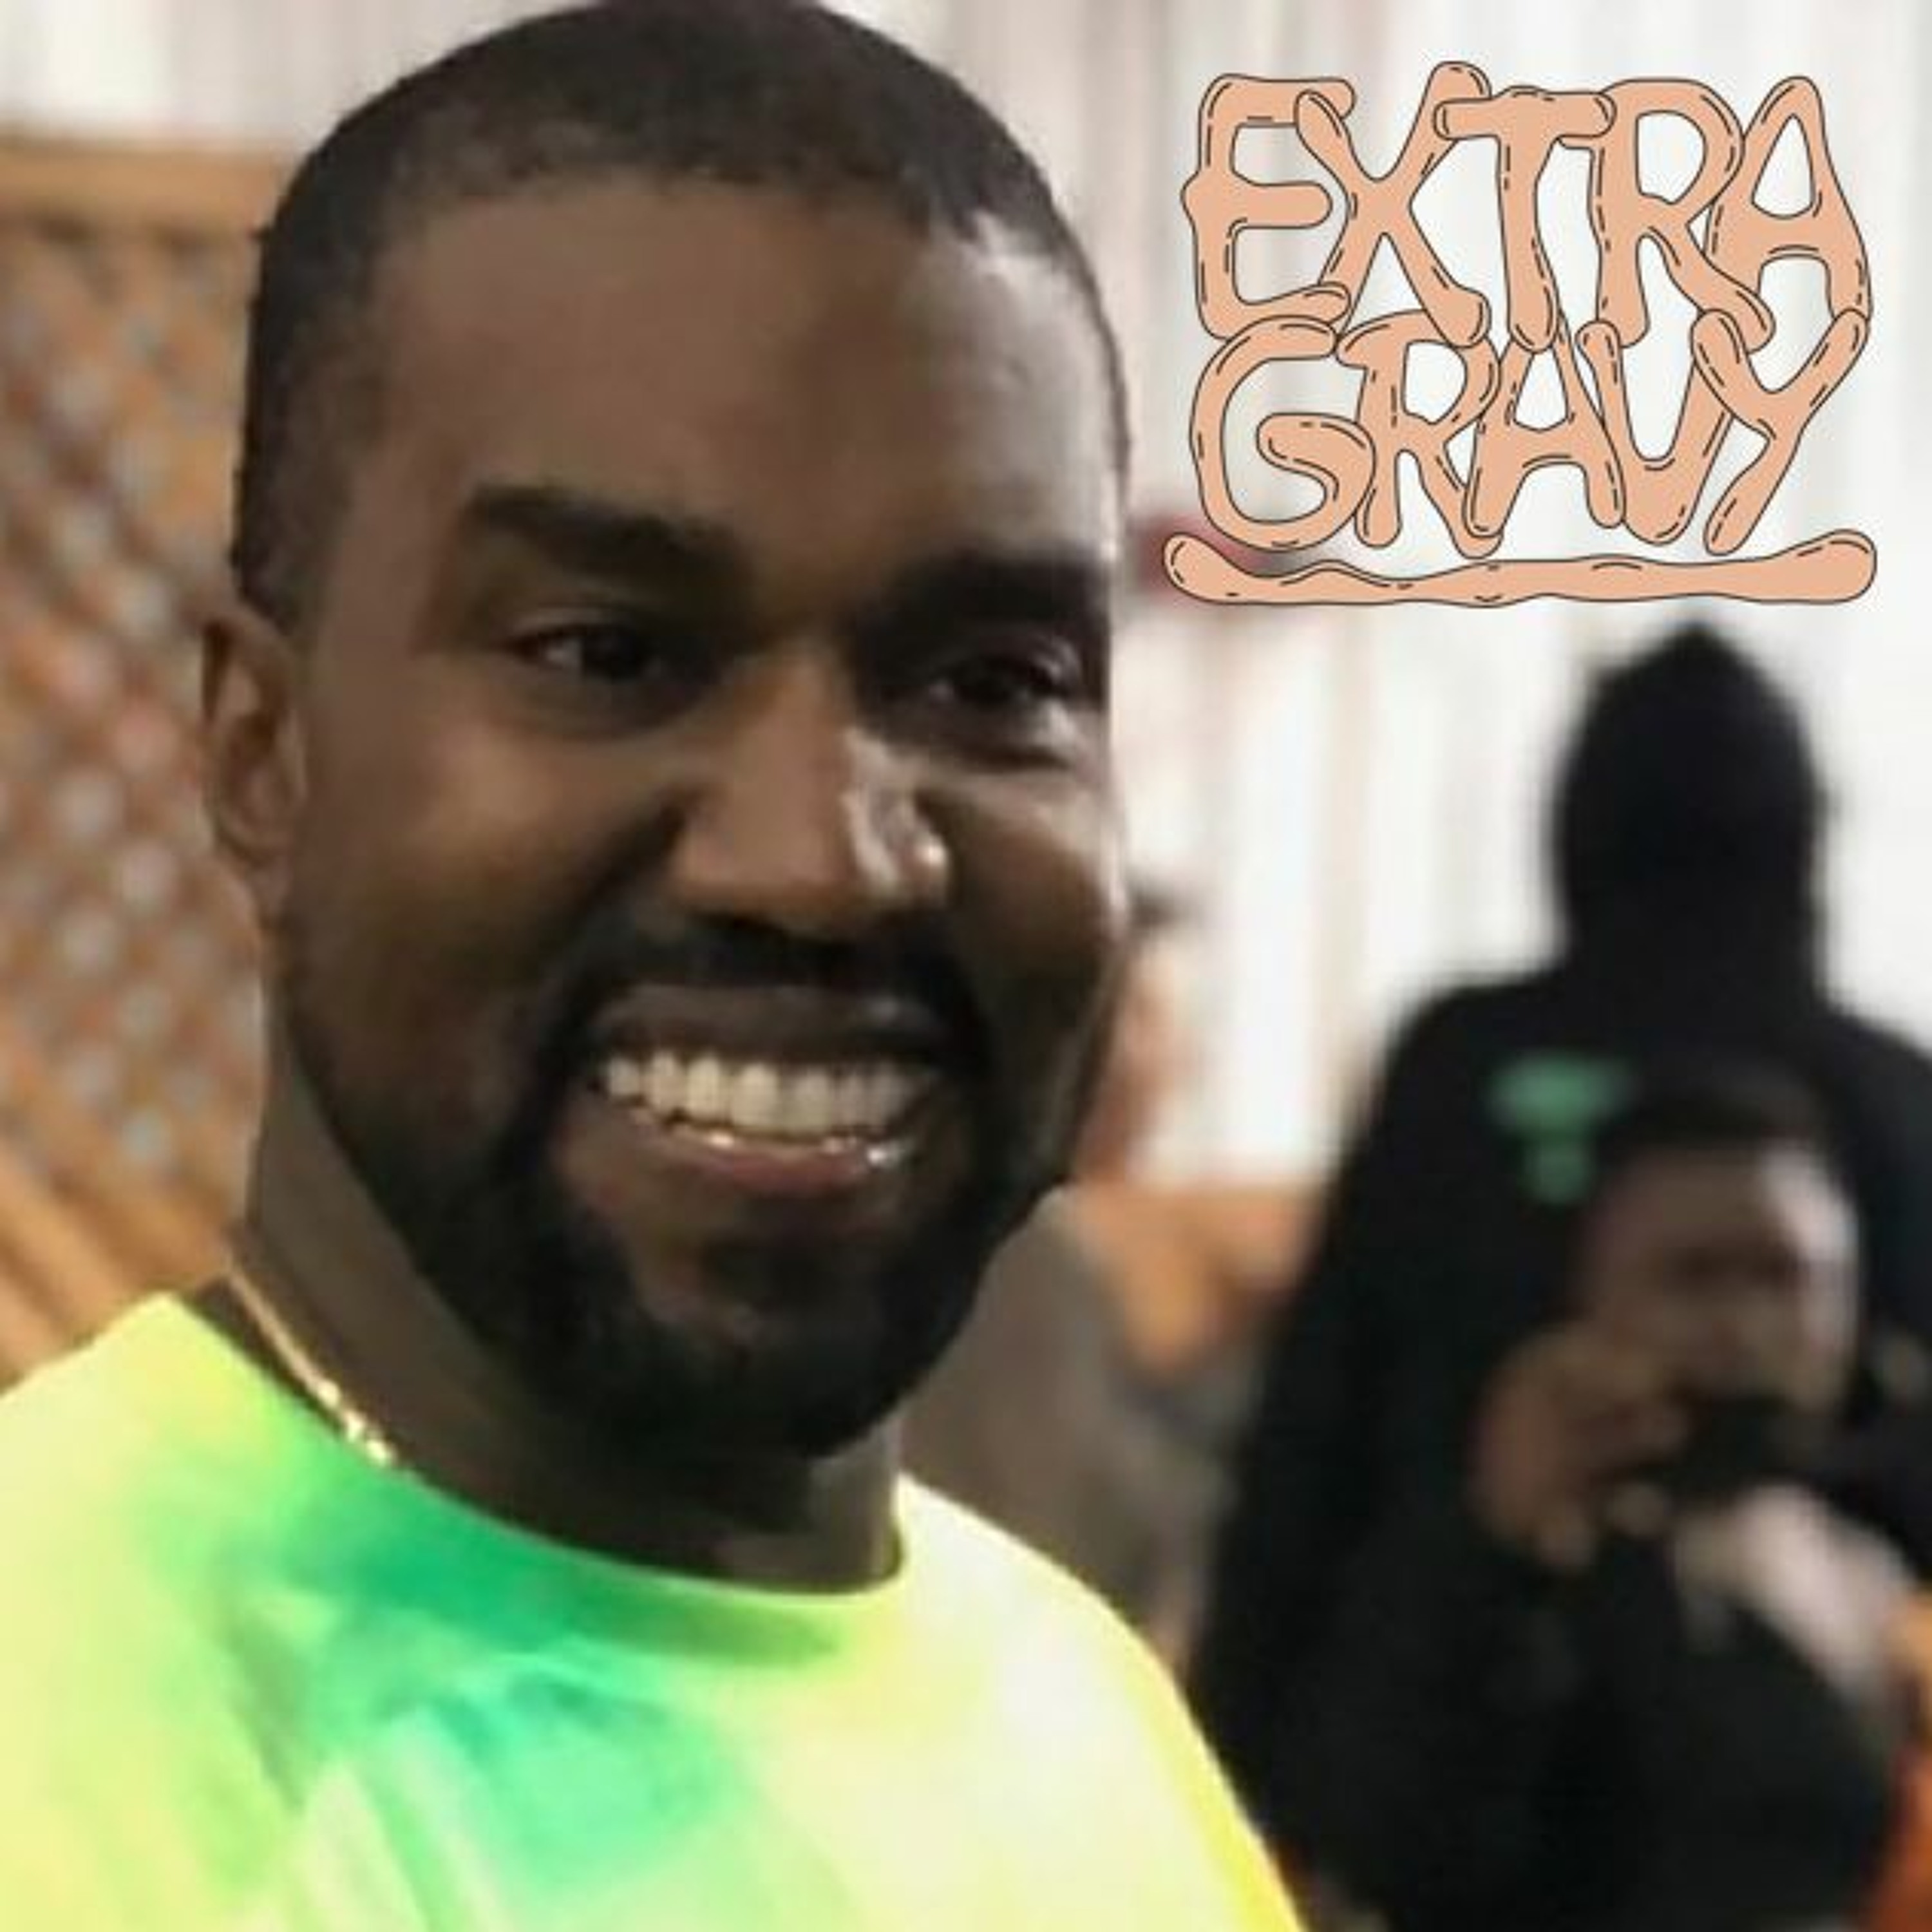 Thumbnail for "The Mysterious Case of Kanye West".